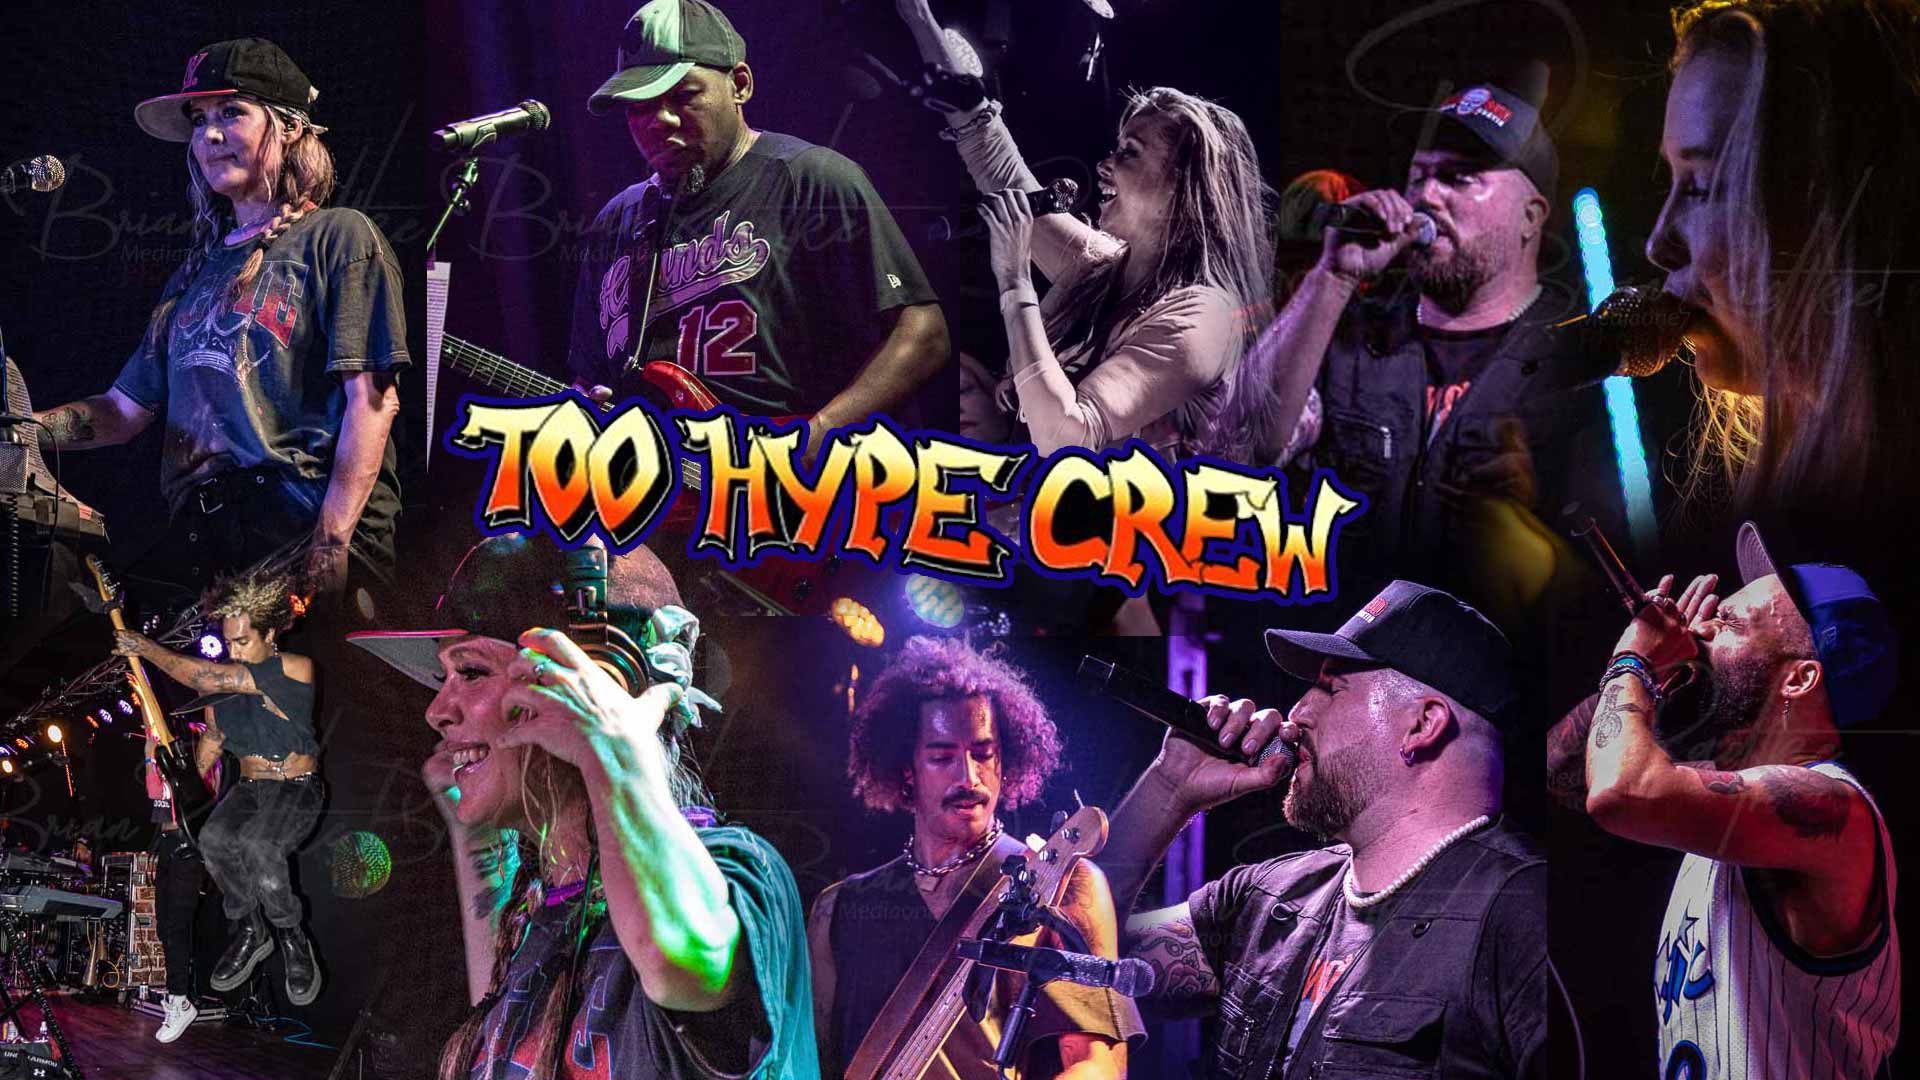 Too Hype Crew Band brings the hip hop to Maloney's